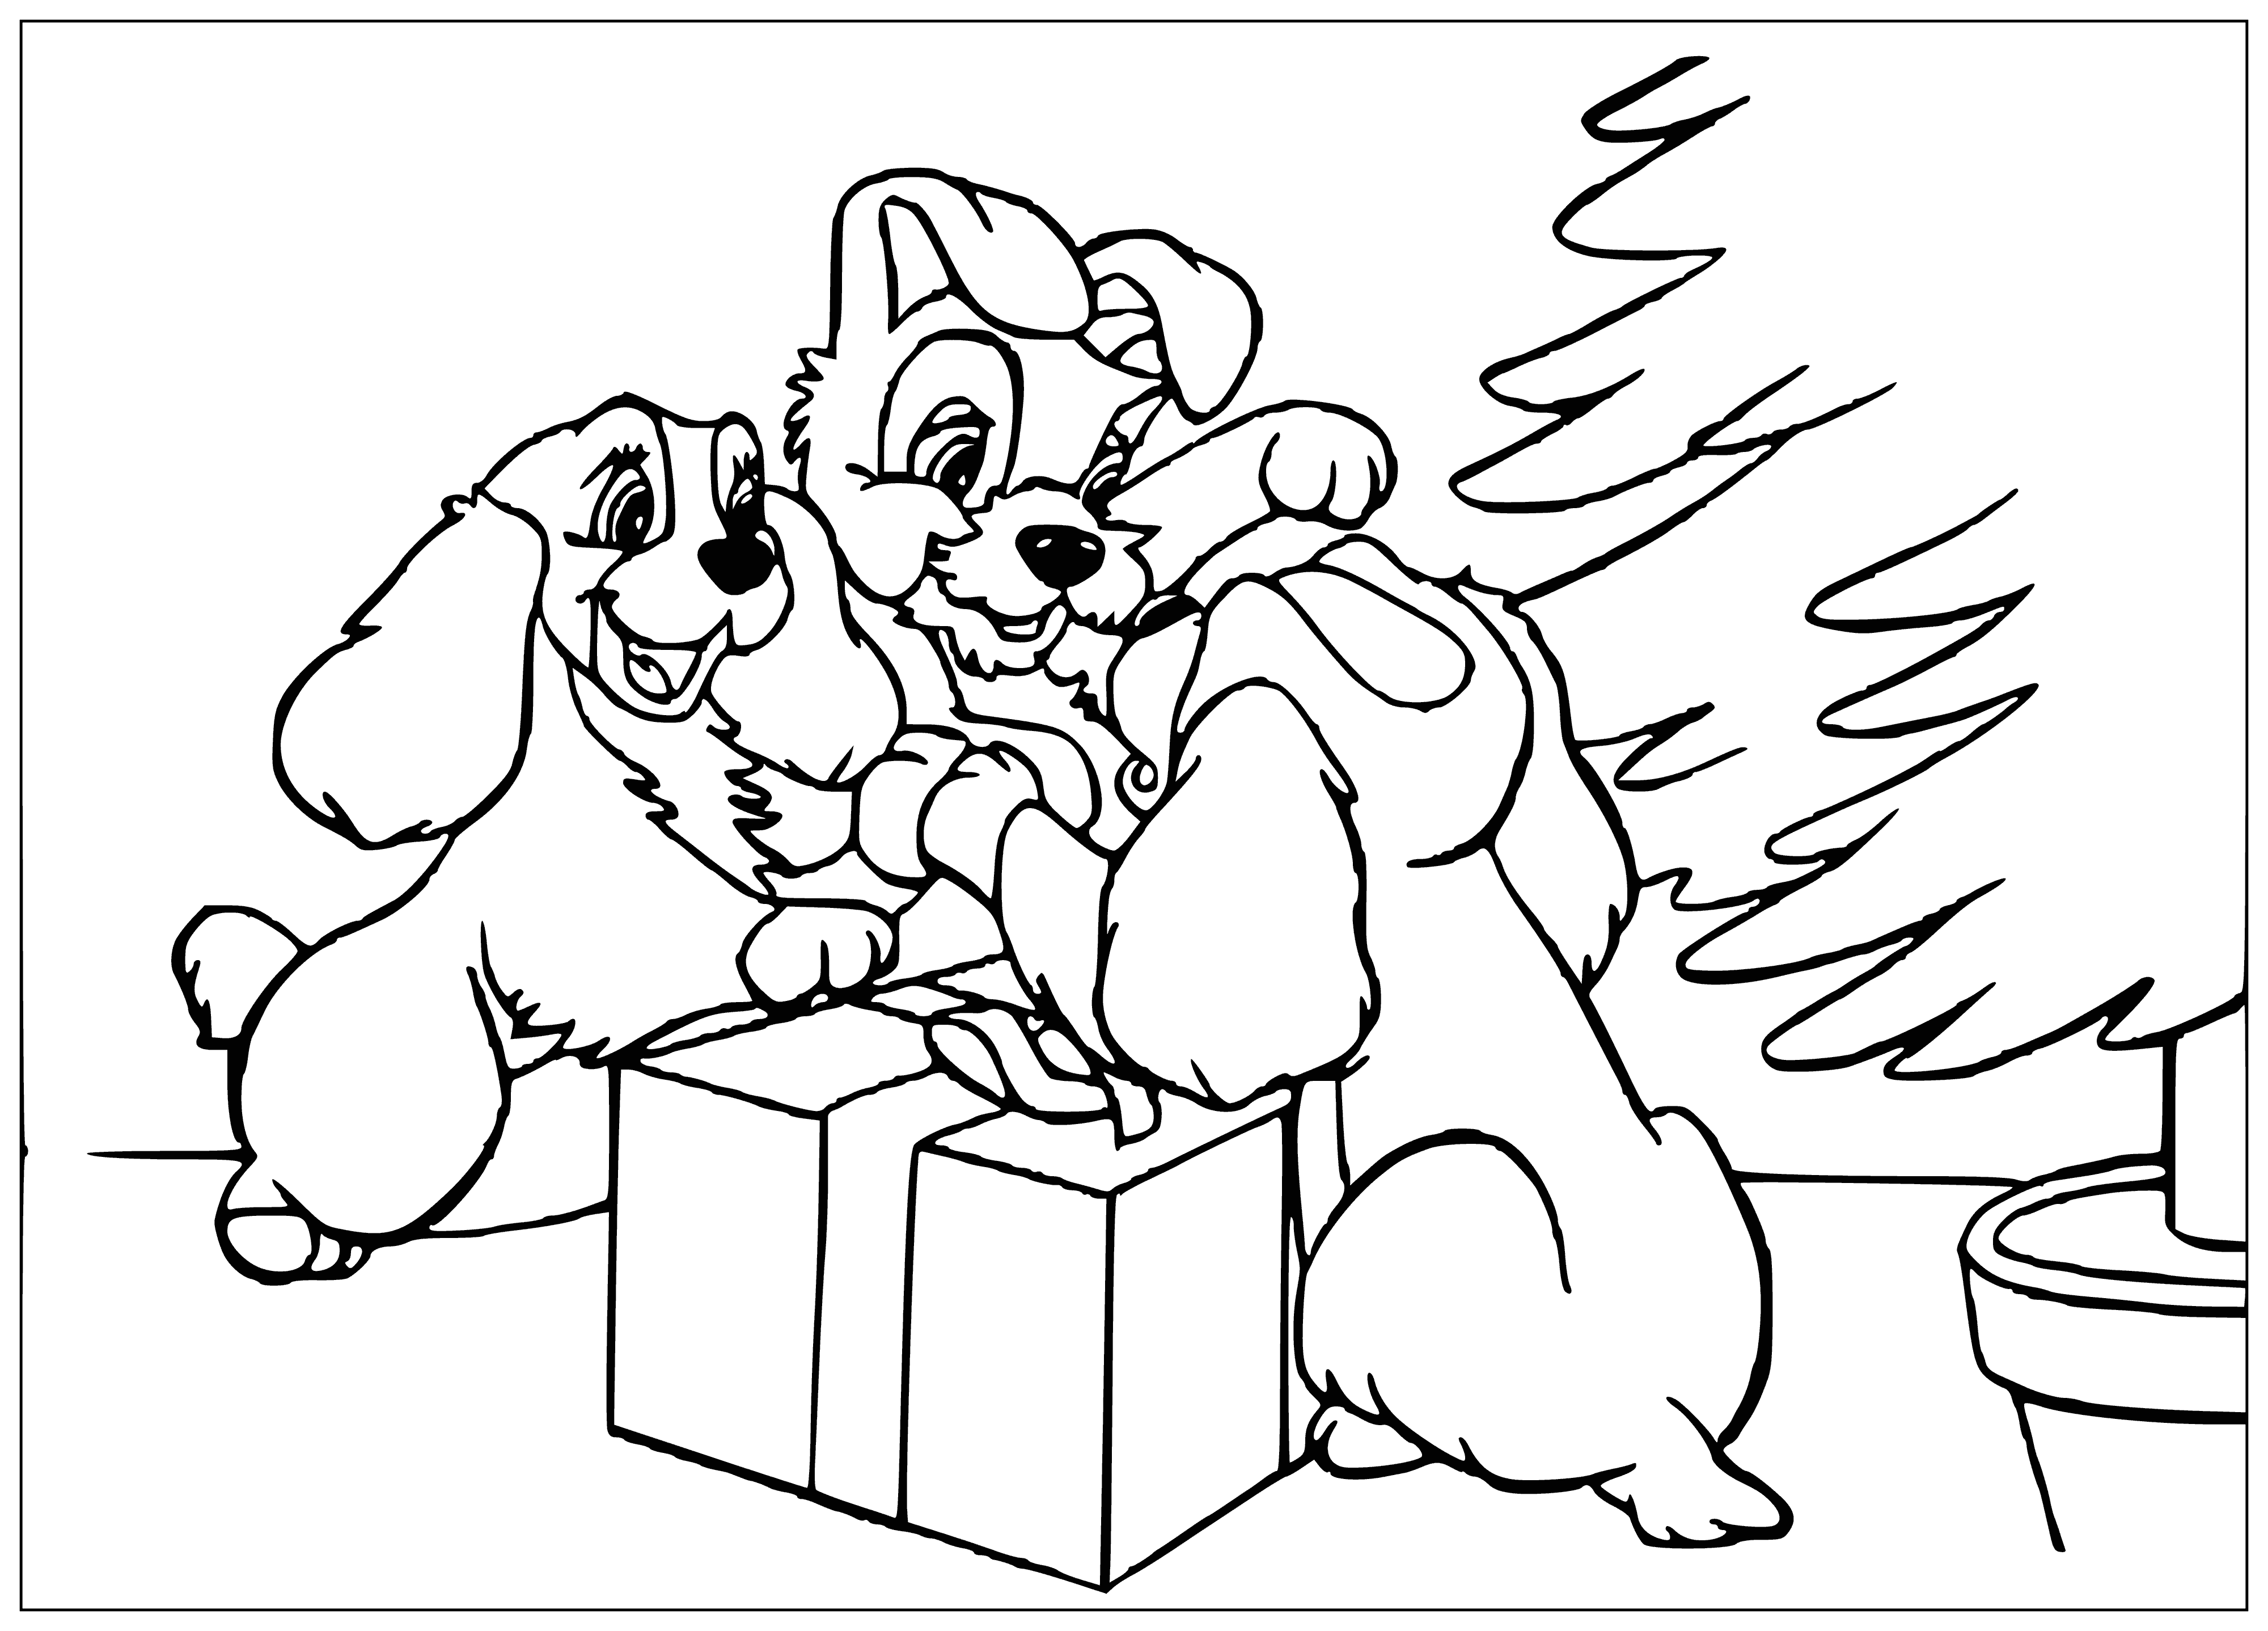 coloring page: A gift for the Lady sits under the tree with a big red bow - a perfect surprise.